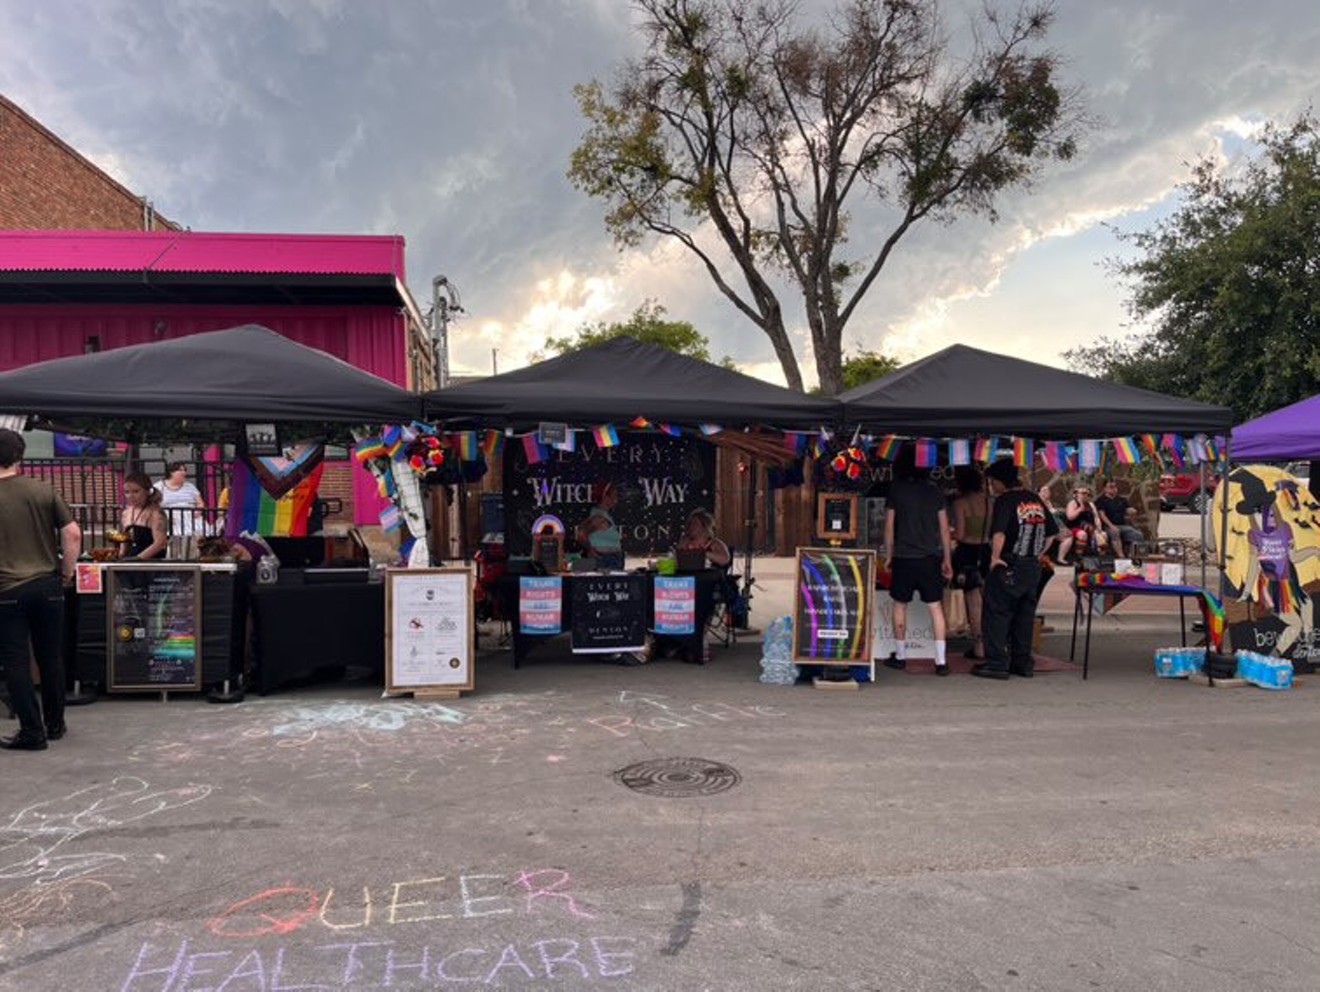 The Every Witch Way (EWW) market provides a gathering space in Denton for fans of the occult, magic and the metaphysical.